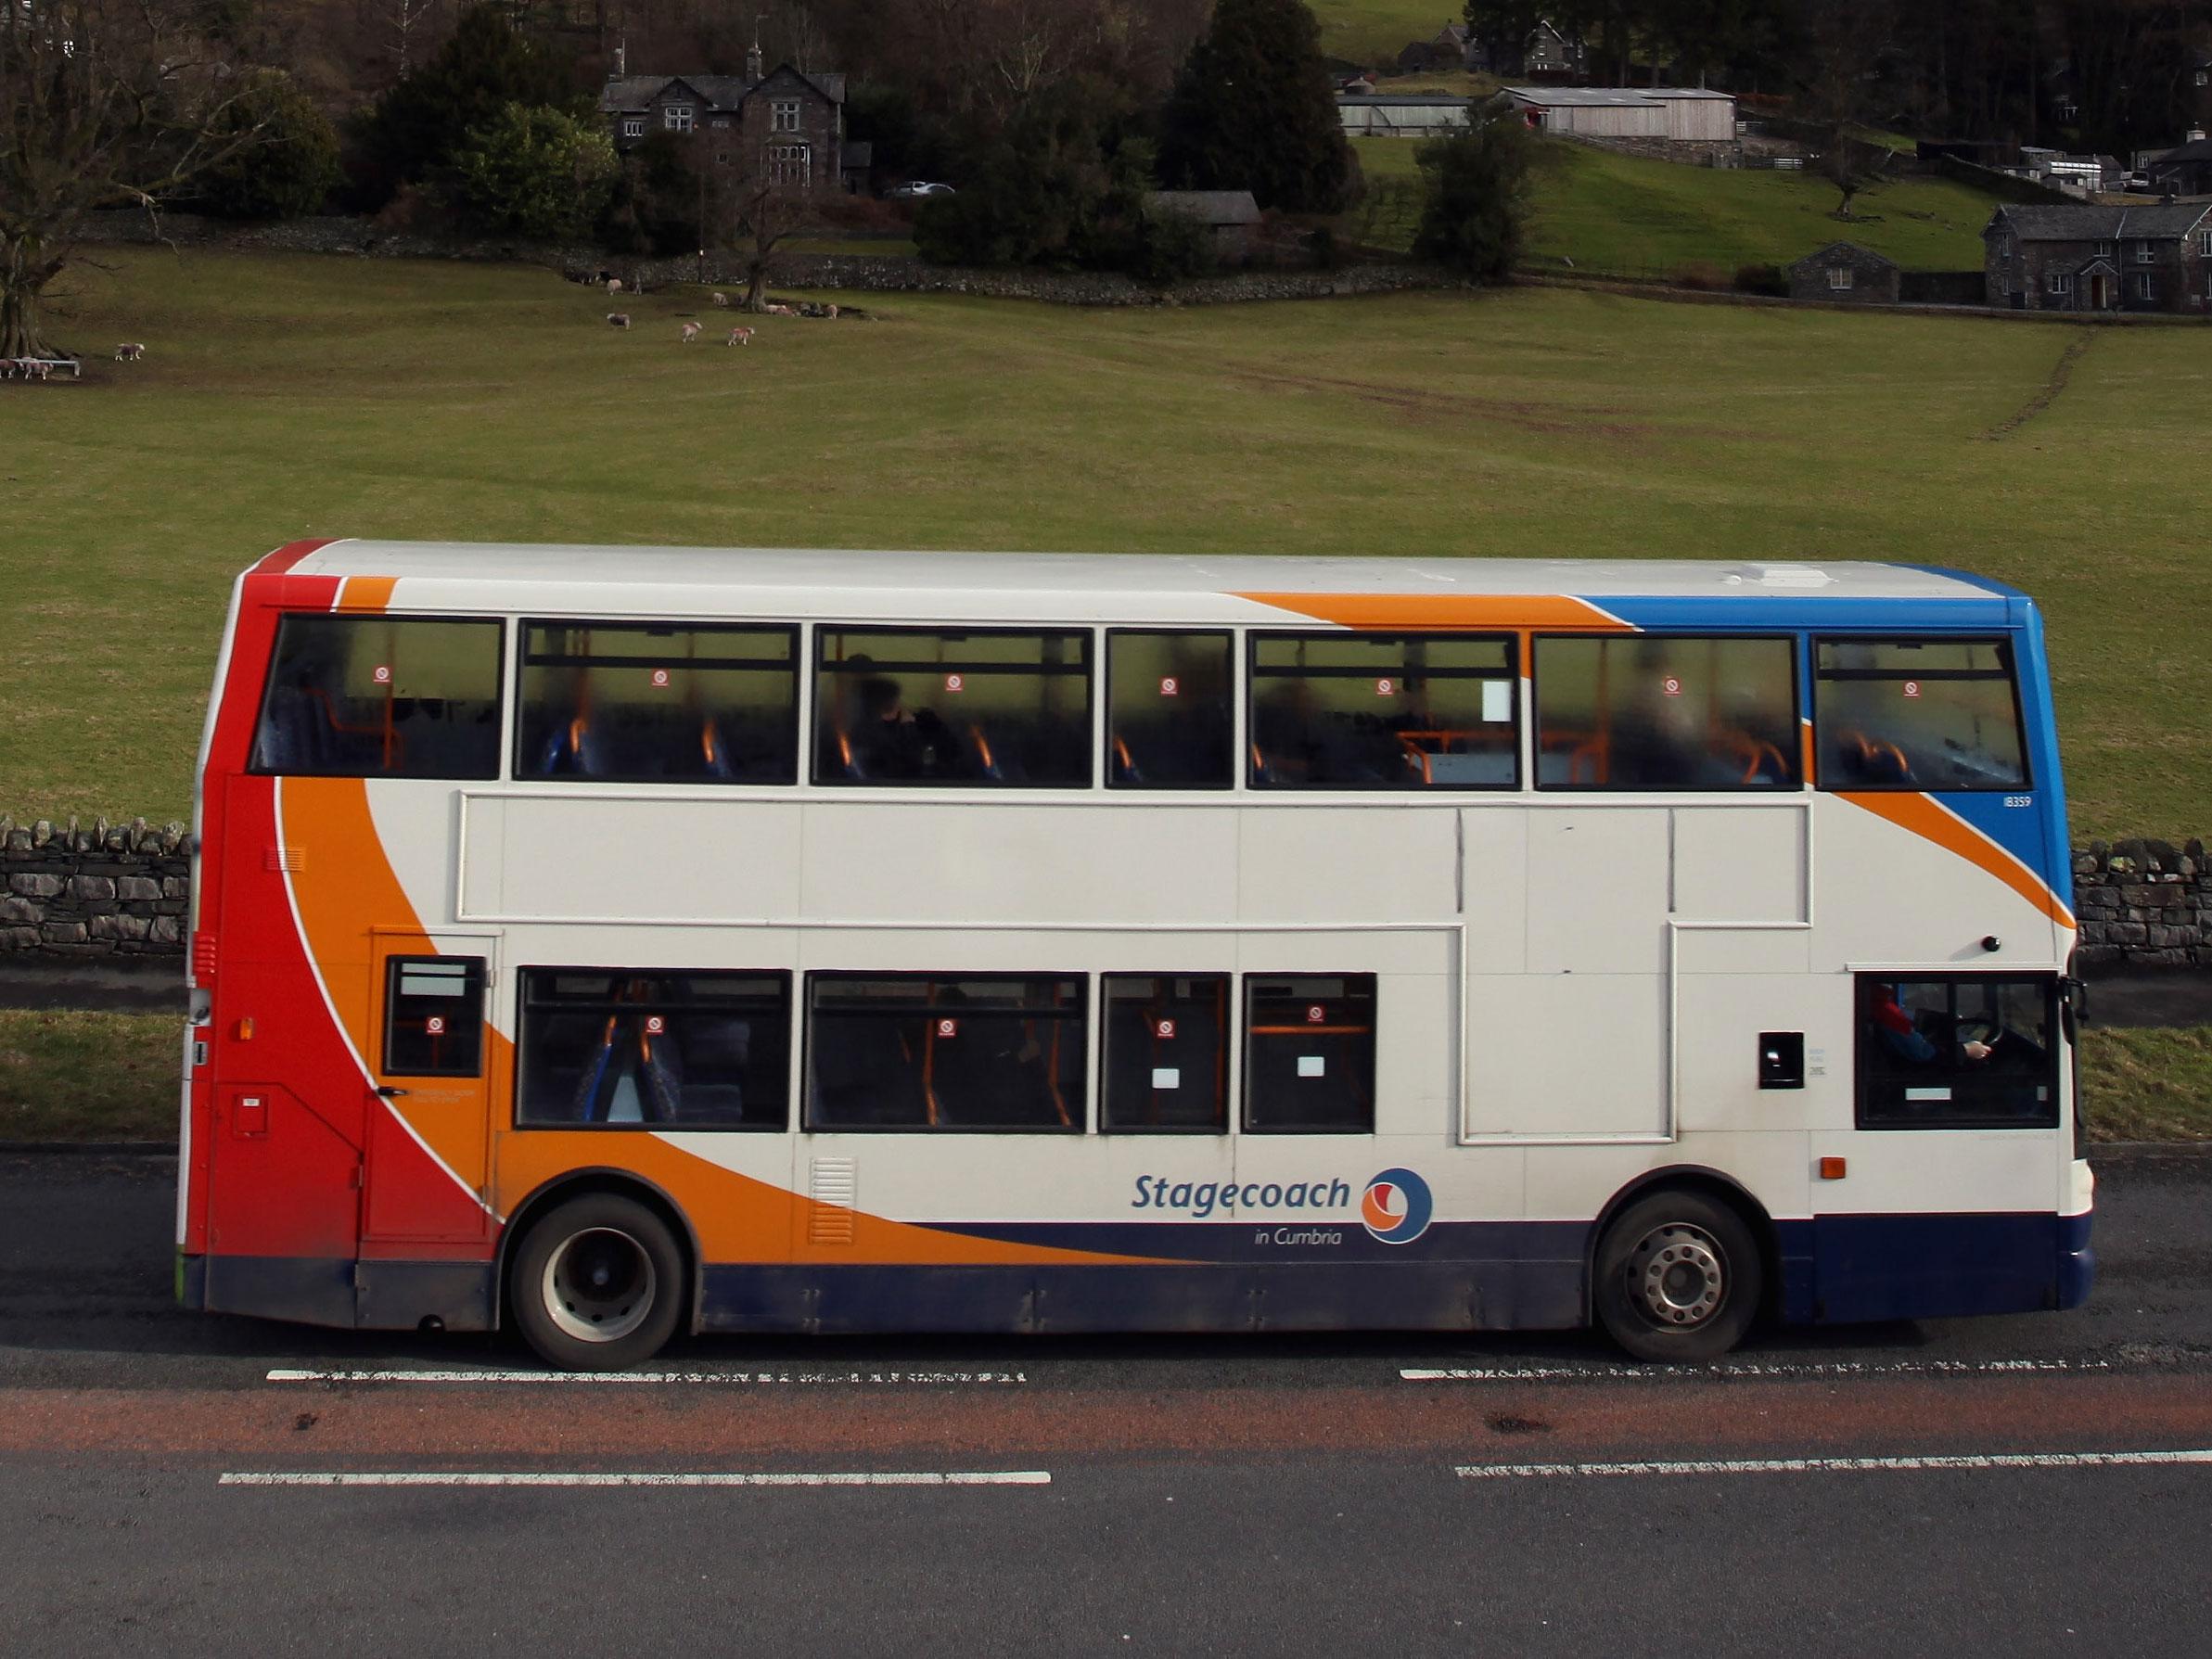 The complaint alleged that a bus driver repeatedly failed to stop for Muslim passengers